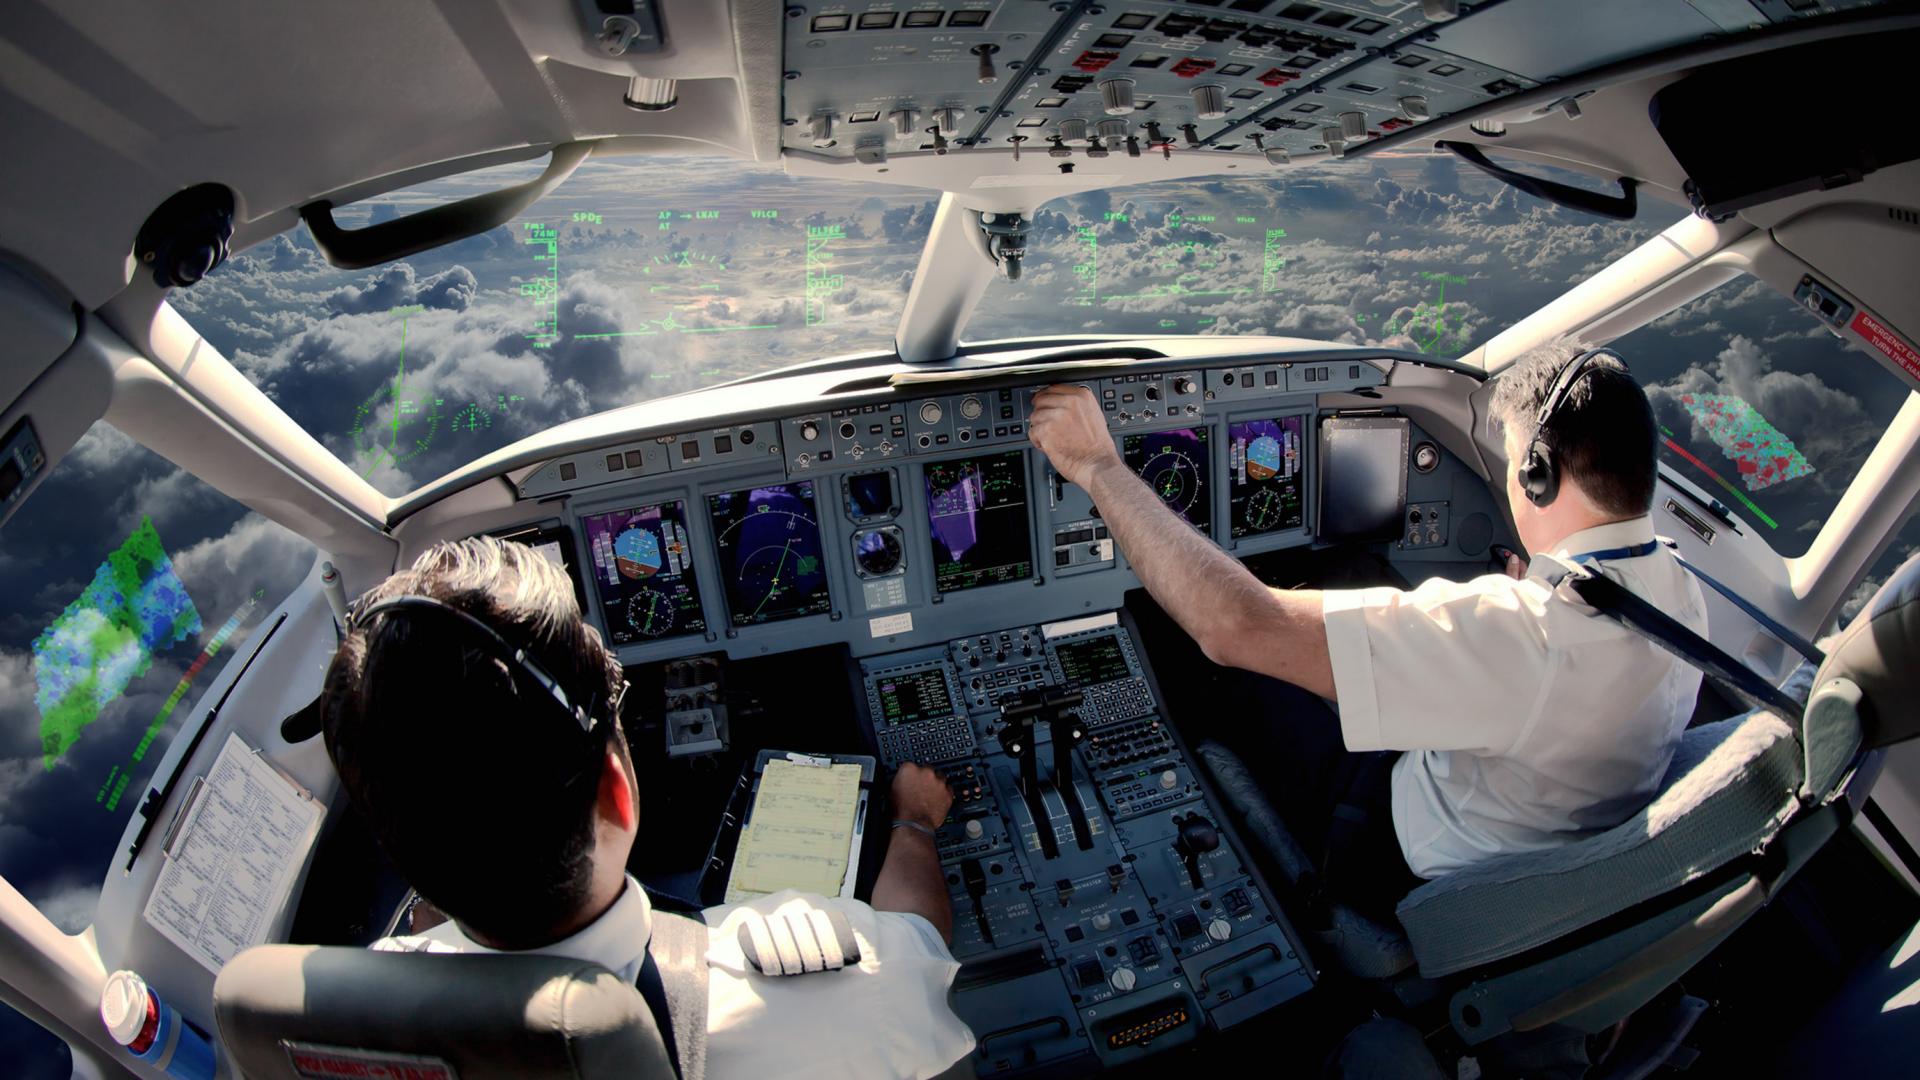 new avionics HUD technology from the pilot's point of view